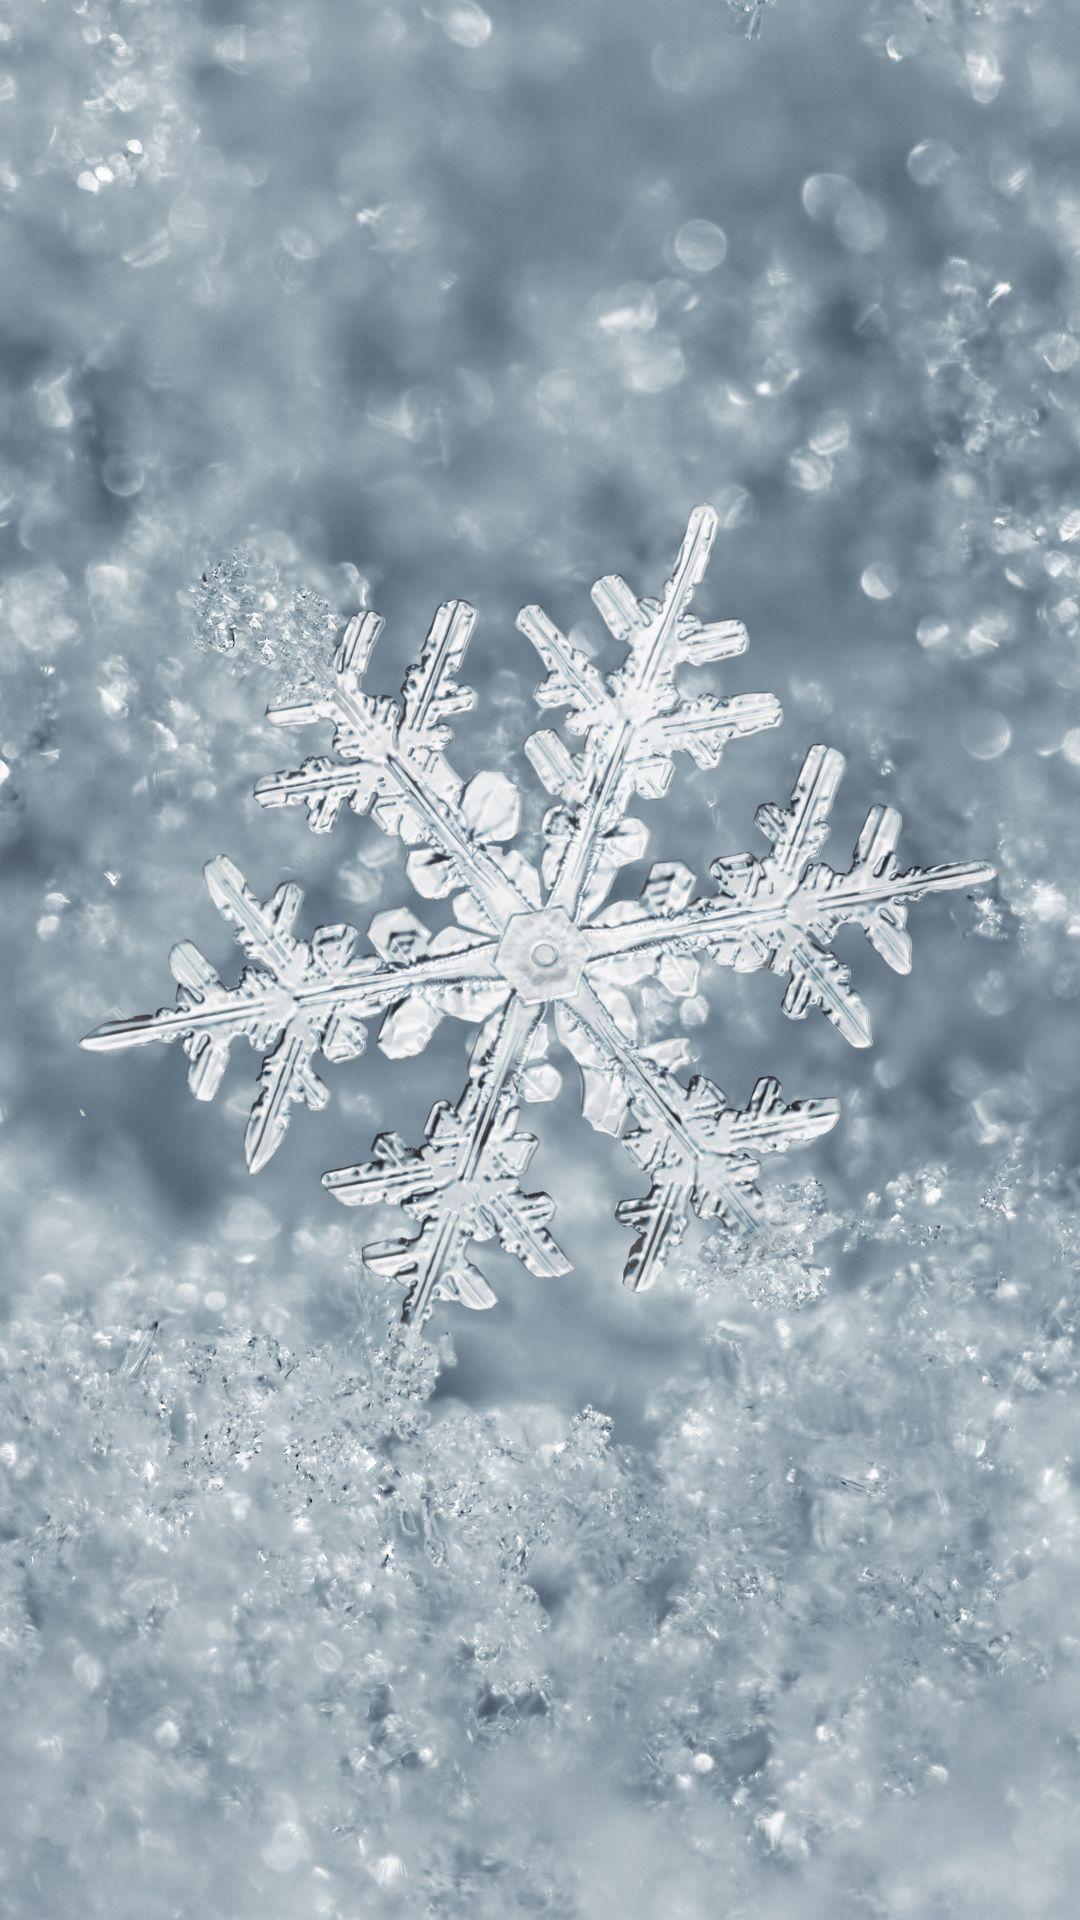 Falling snowflakes wallpapers to match iPhone 13 Pro colors